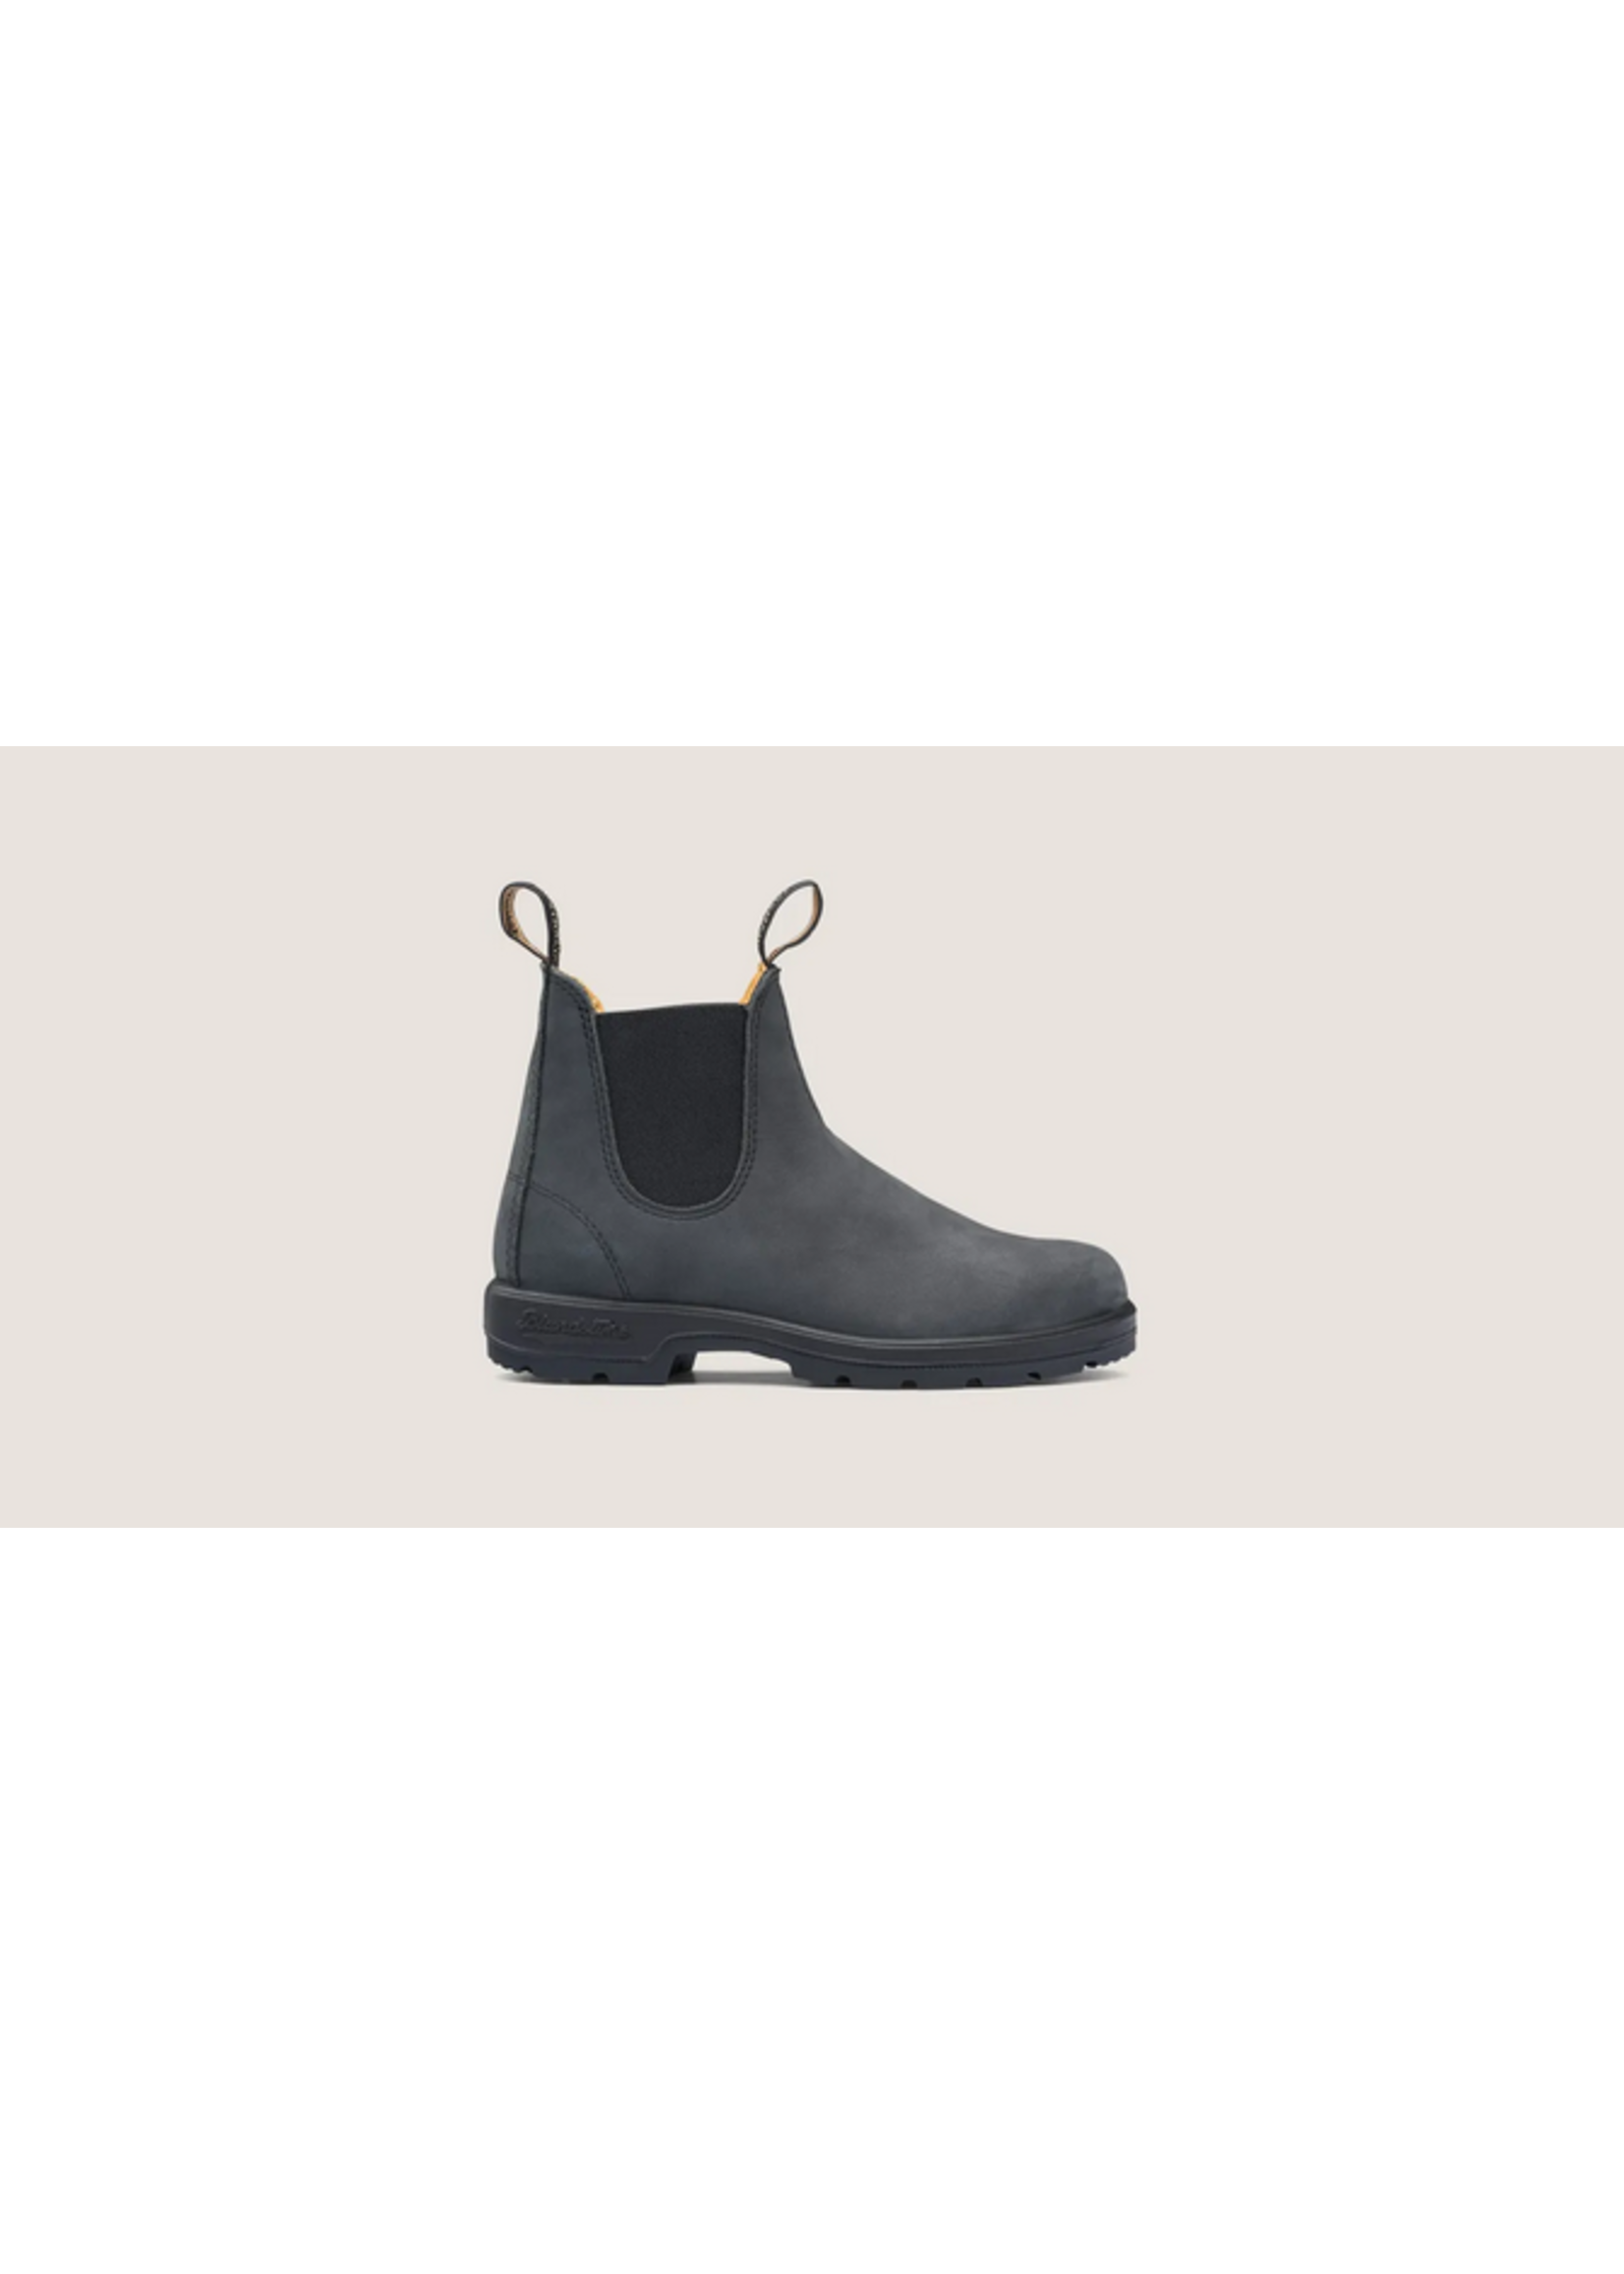 Blundstone 587 Elastic Sided Boot Lined